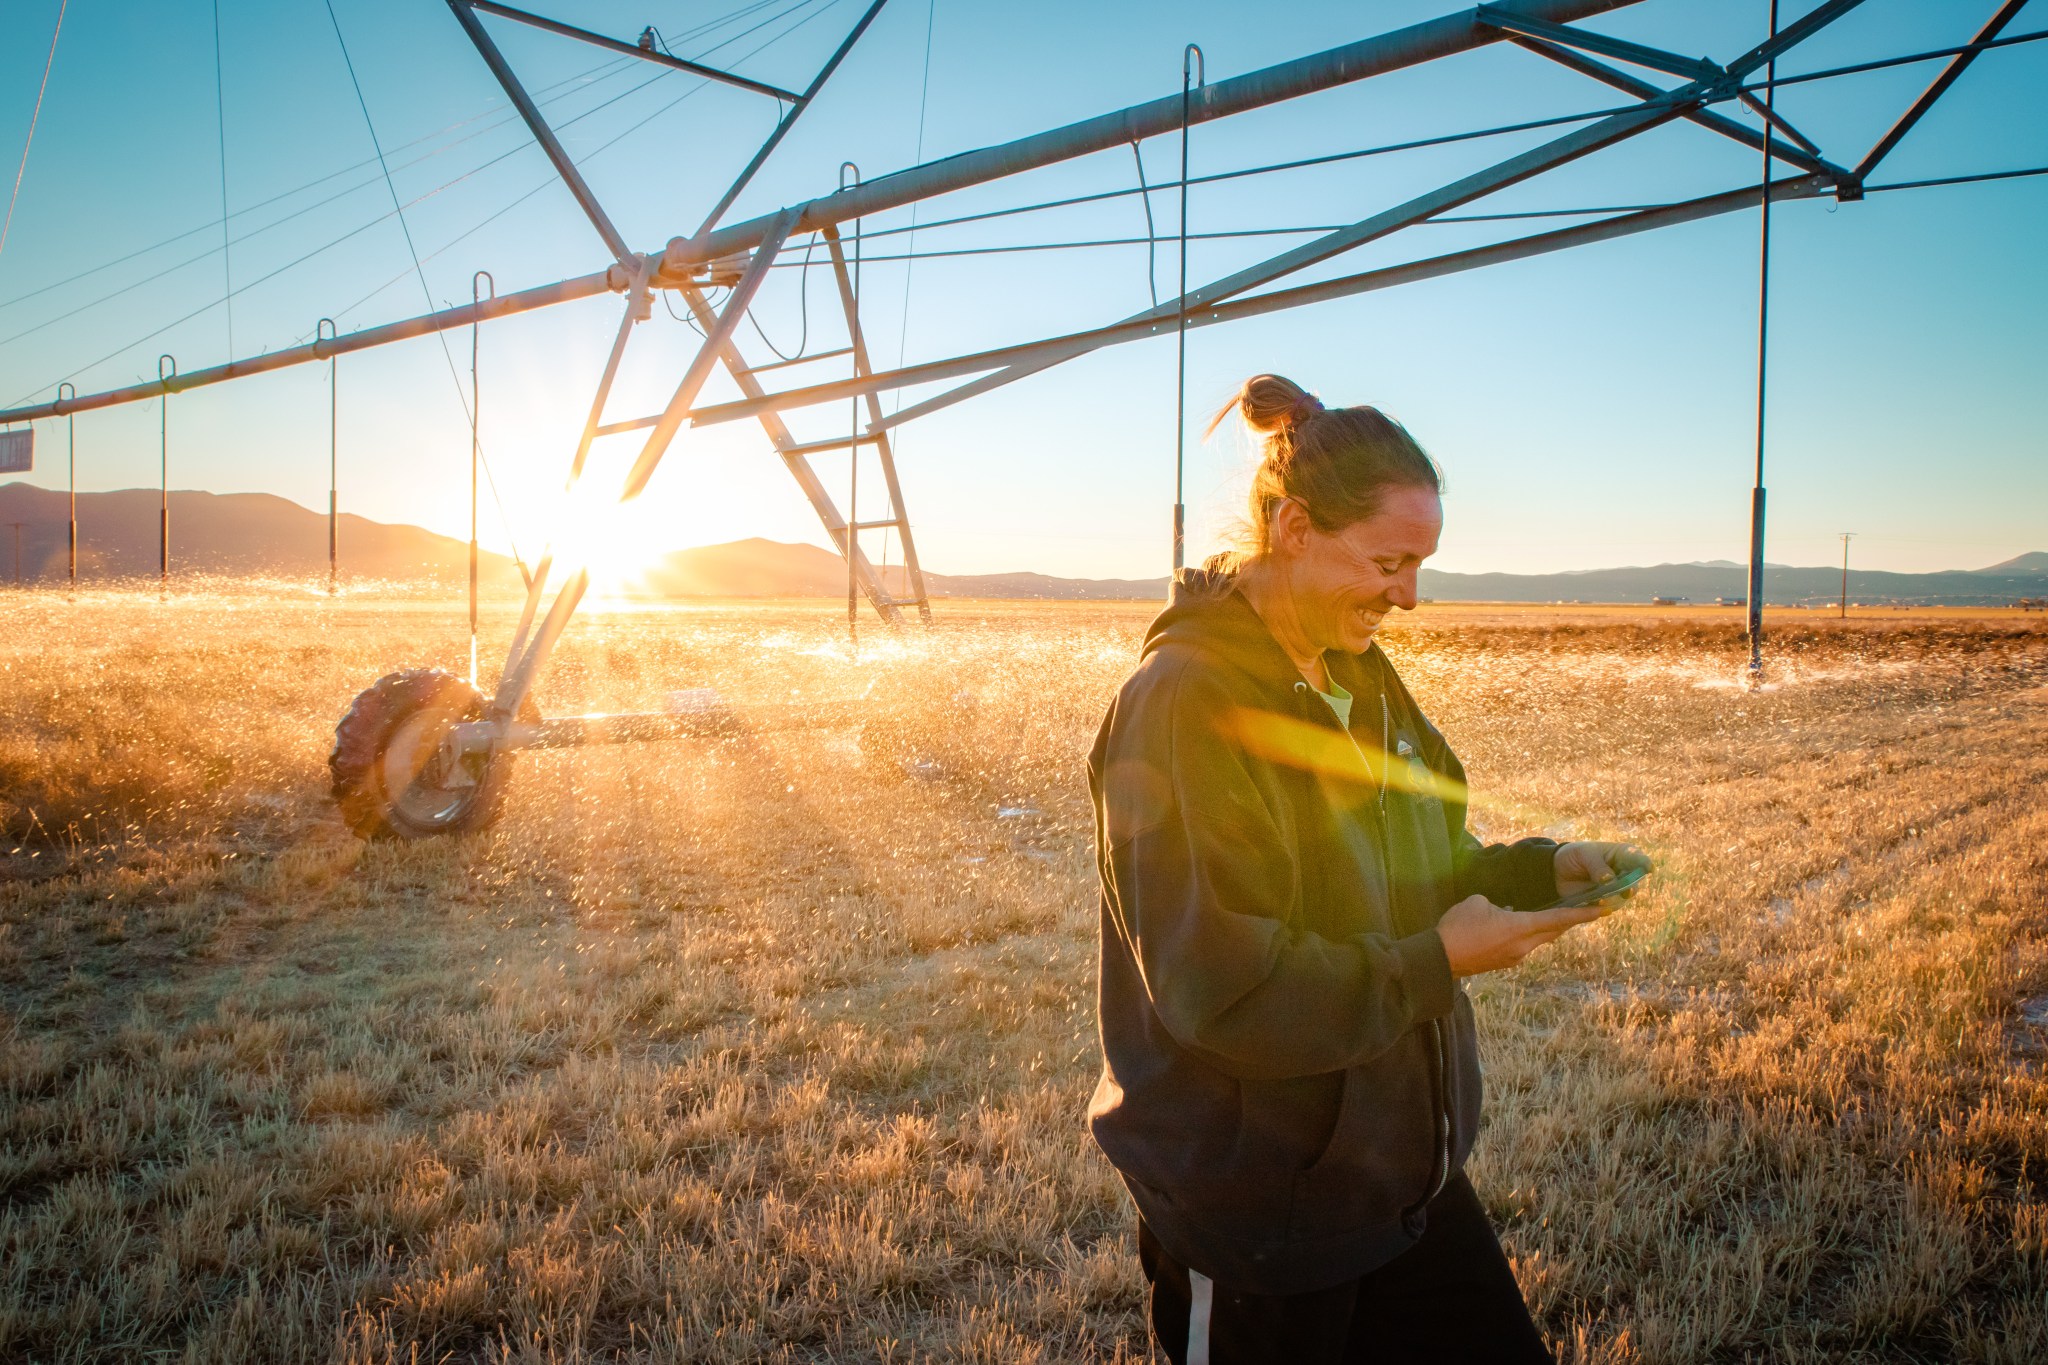 Nevada farmer Denise Moyle in a field checking her mobile phone.